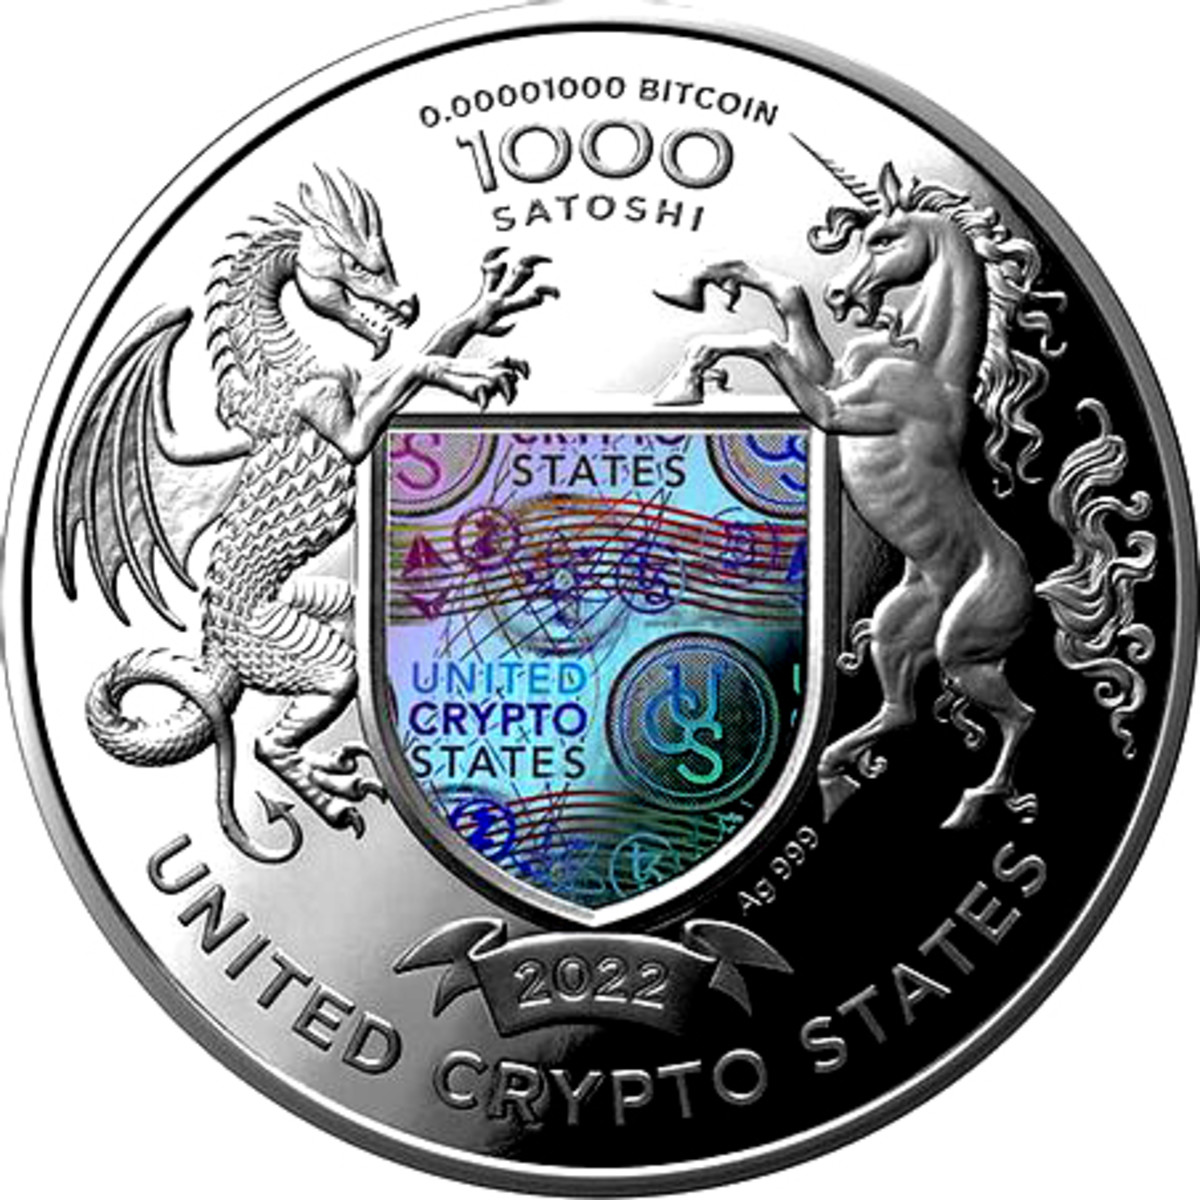 A 2022 silver “coin” issued by the United Crypto States denominated 1,000 Satoshi bears a hologram to protect against counterfeiting. (Image courtesy United Crypto States.)